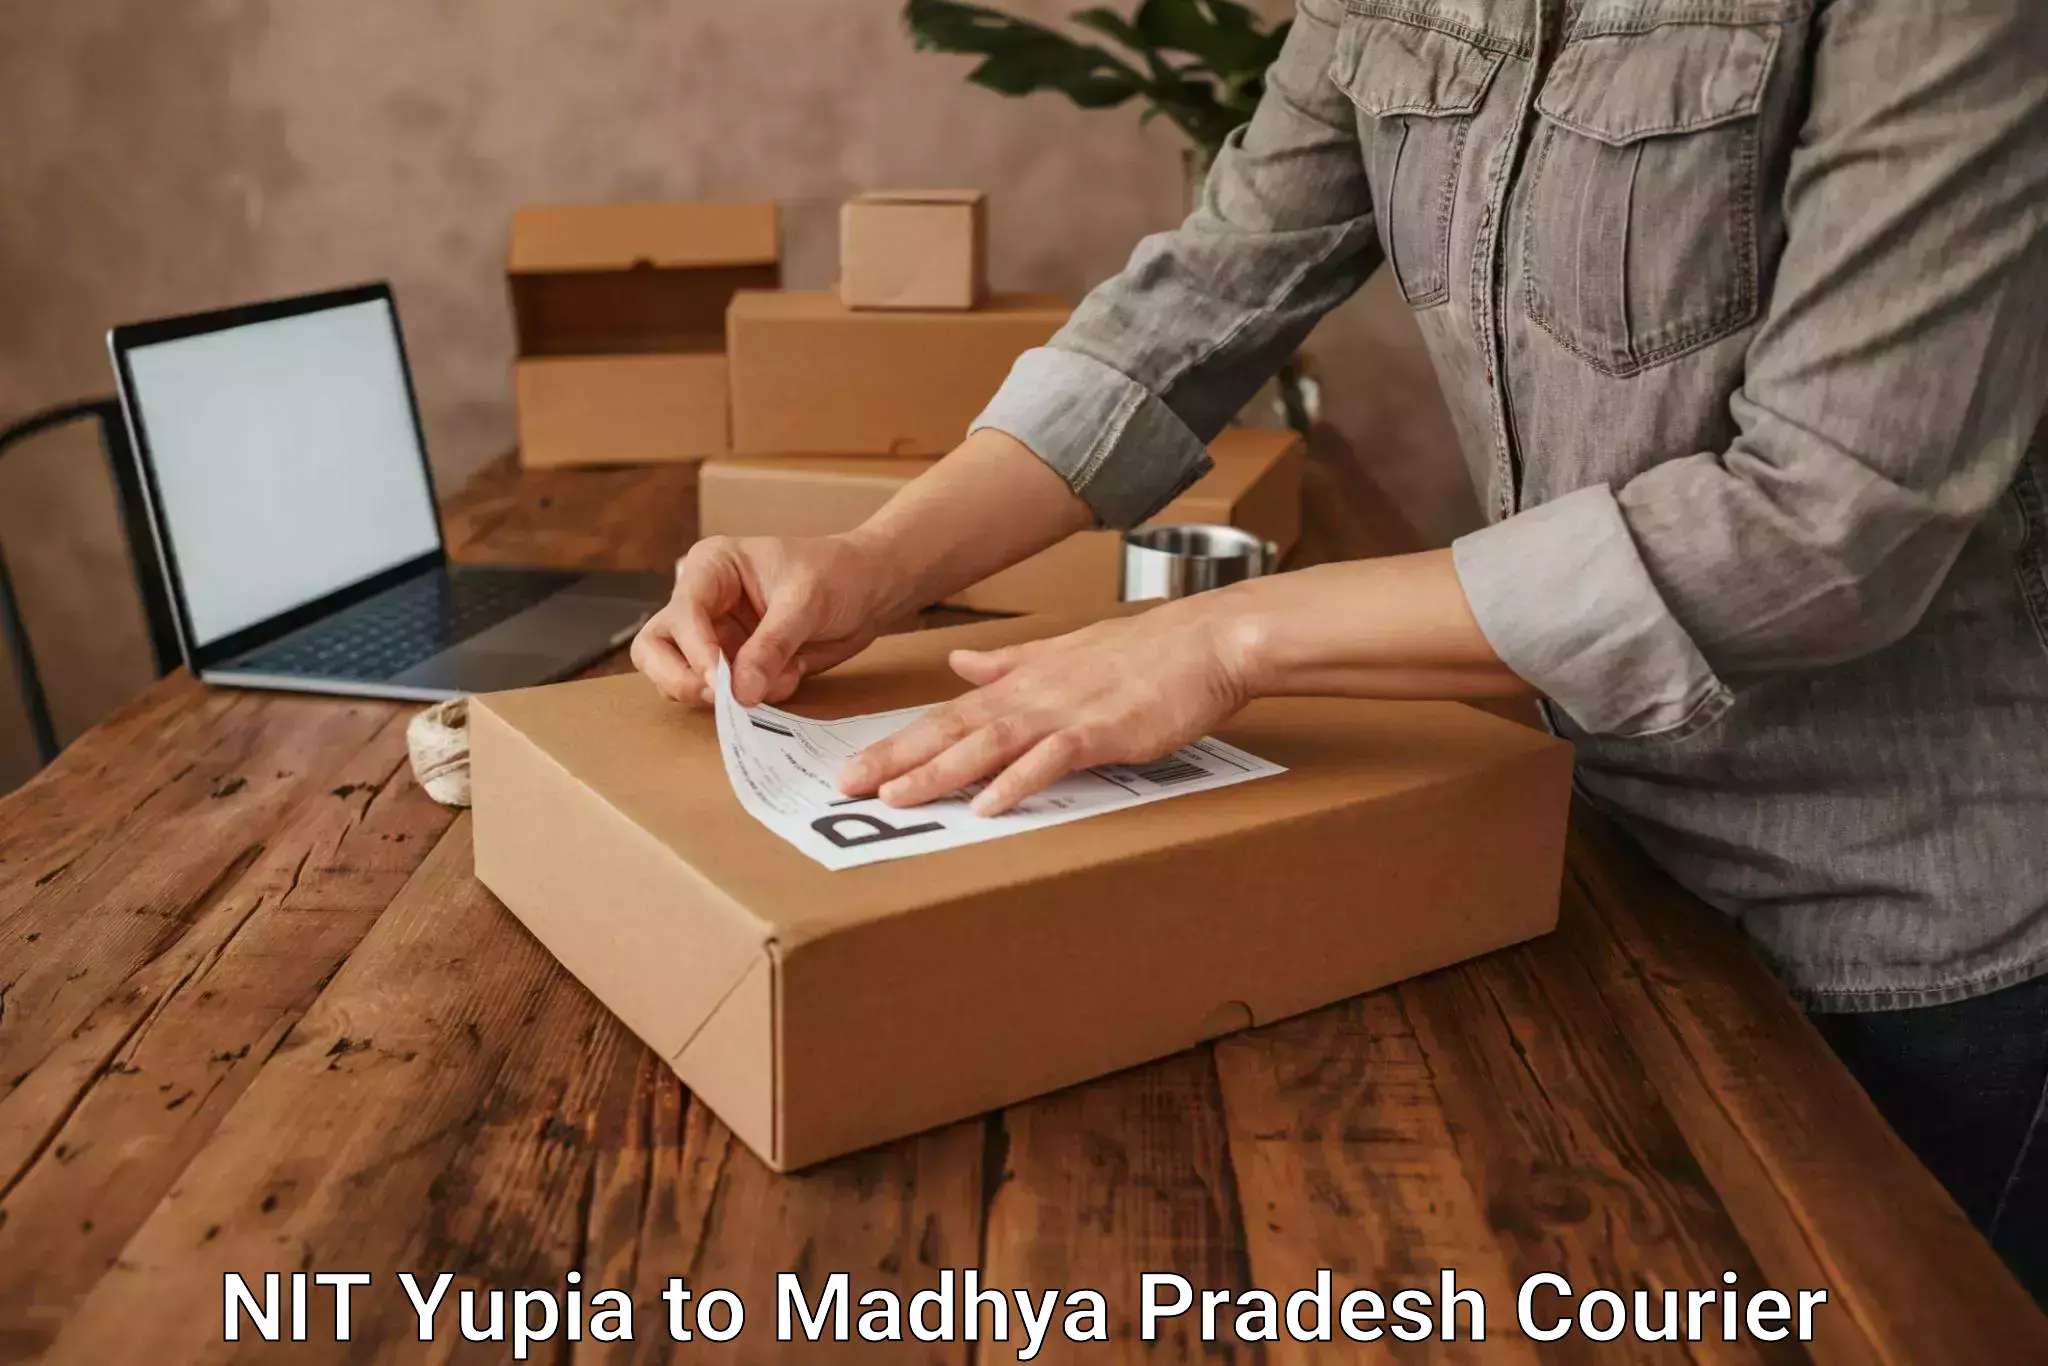 Reliable courier services NIT Yupia to Indore